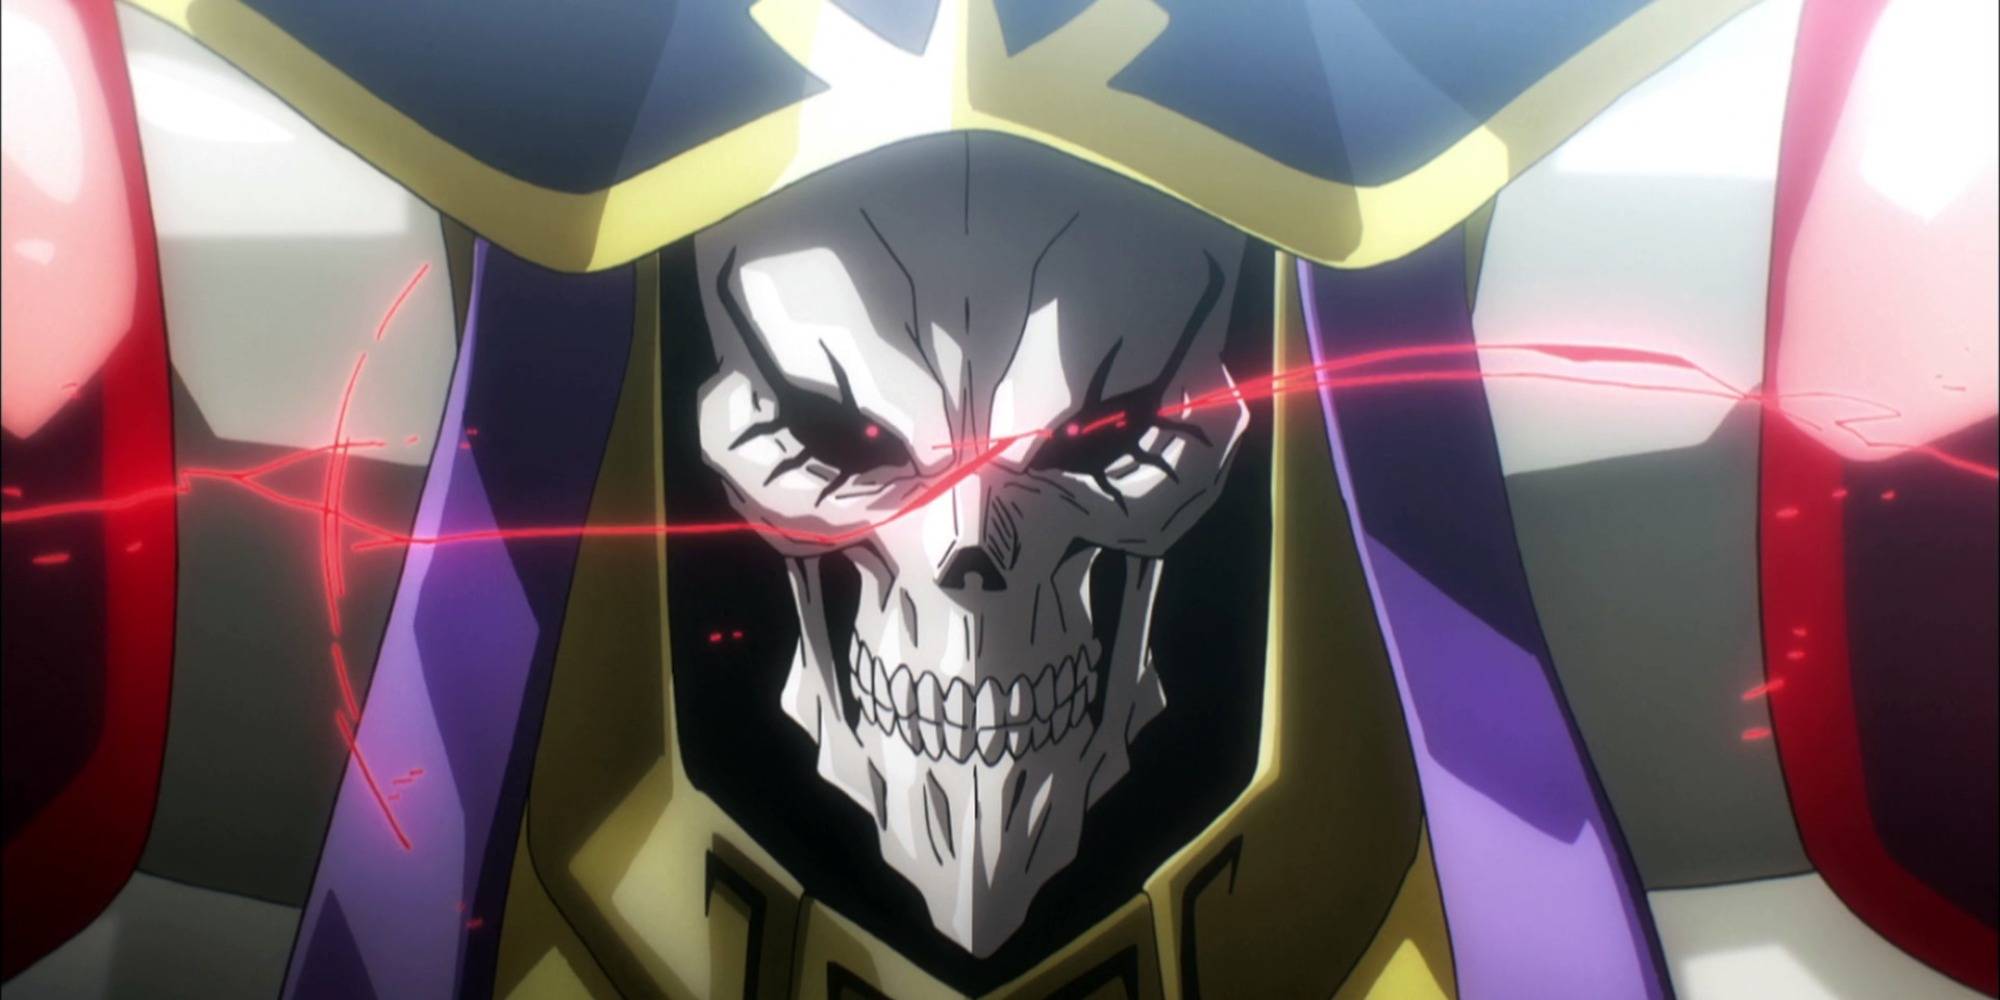 Ainz all gown